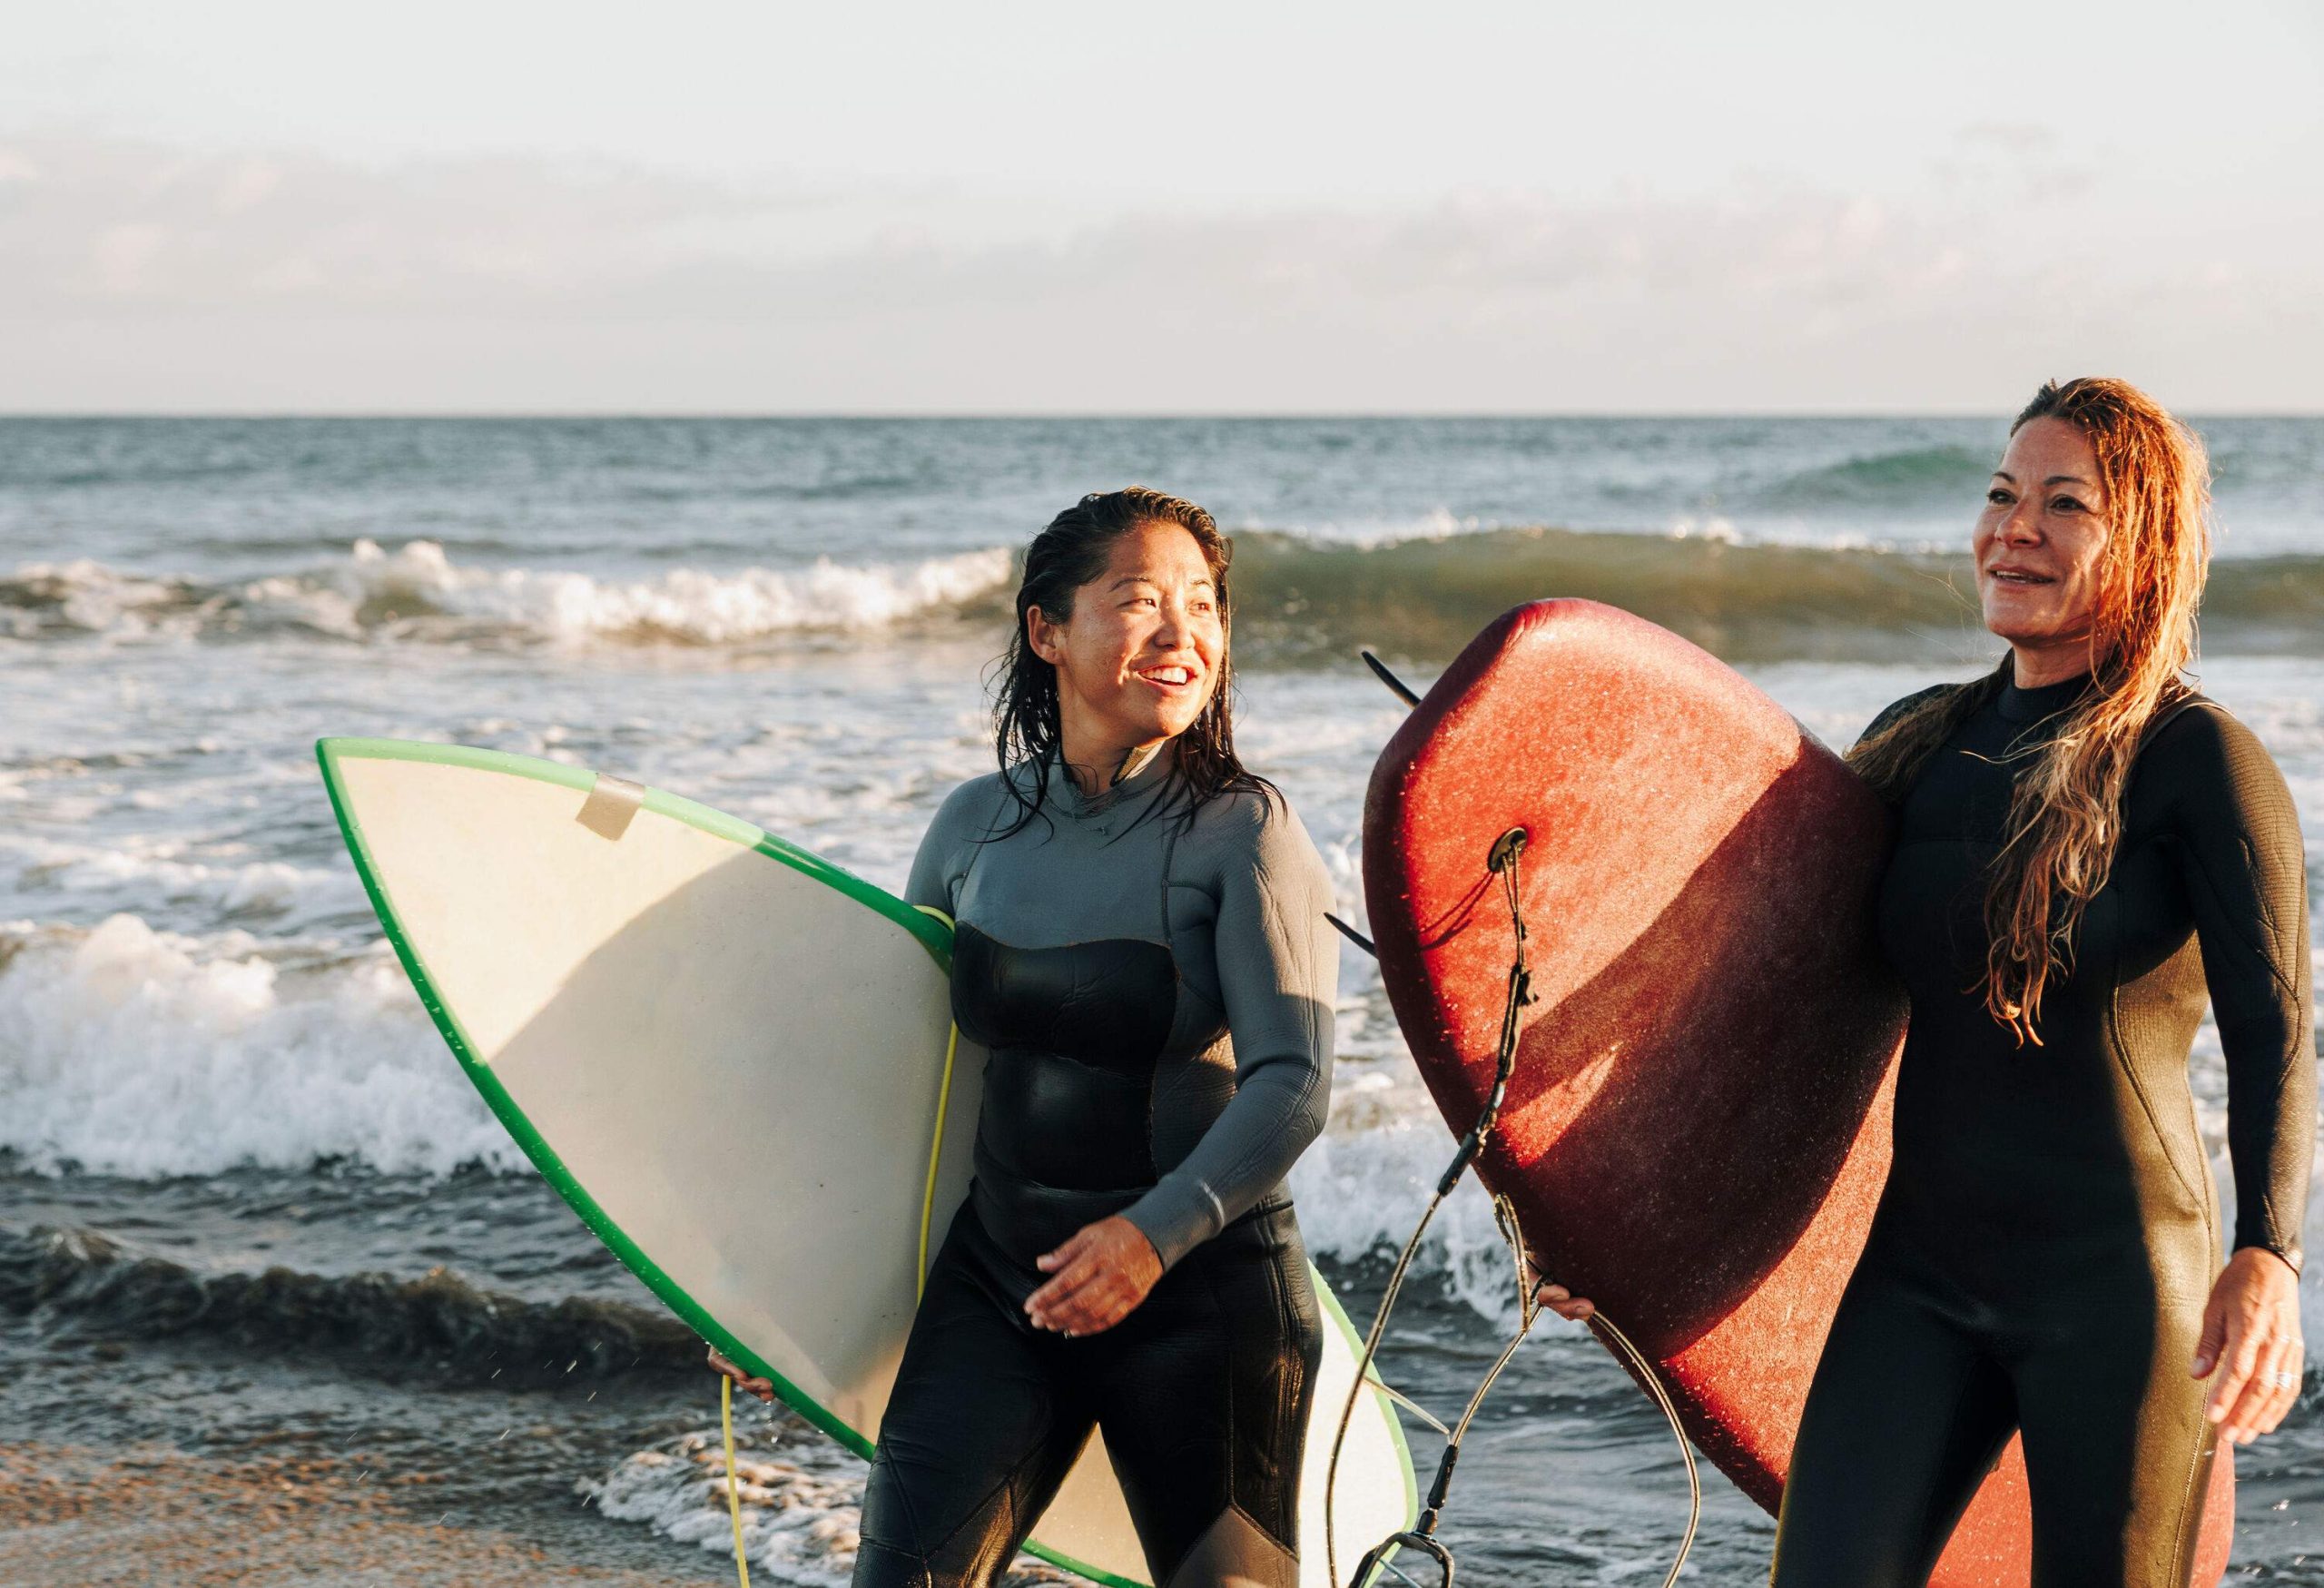 Two happy women in wetsuits holding surfboards on a wavy beach.